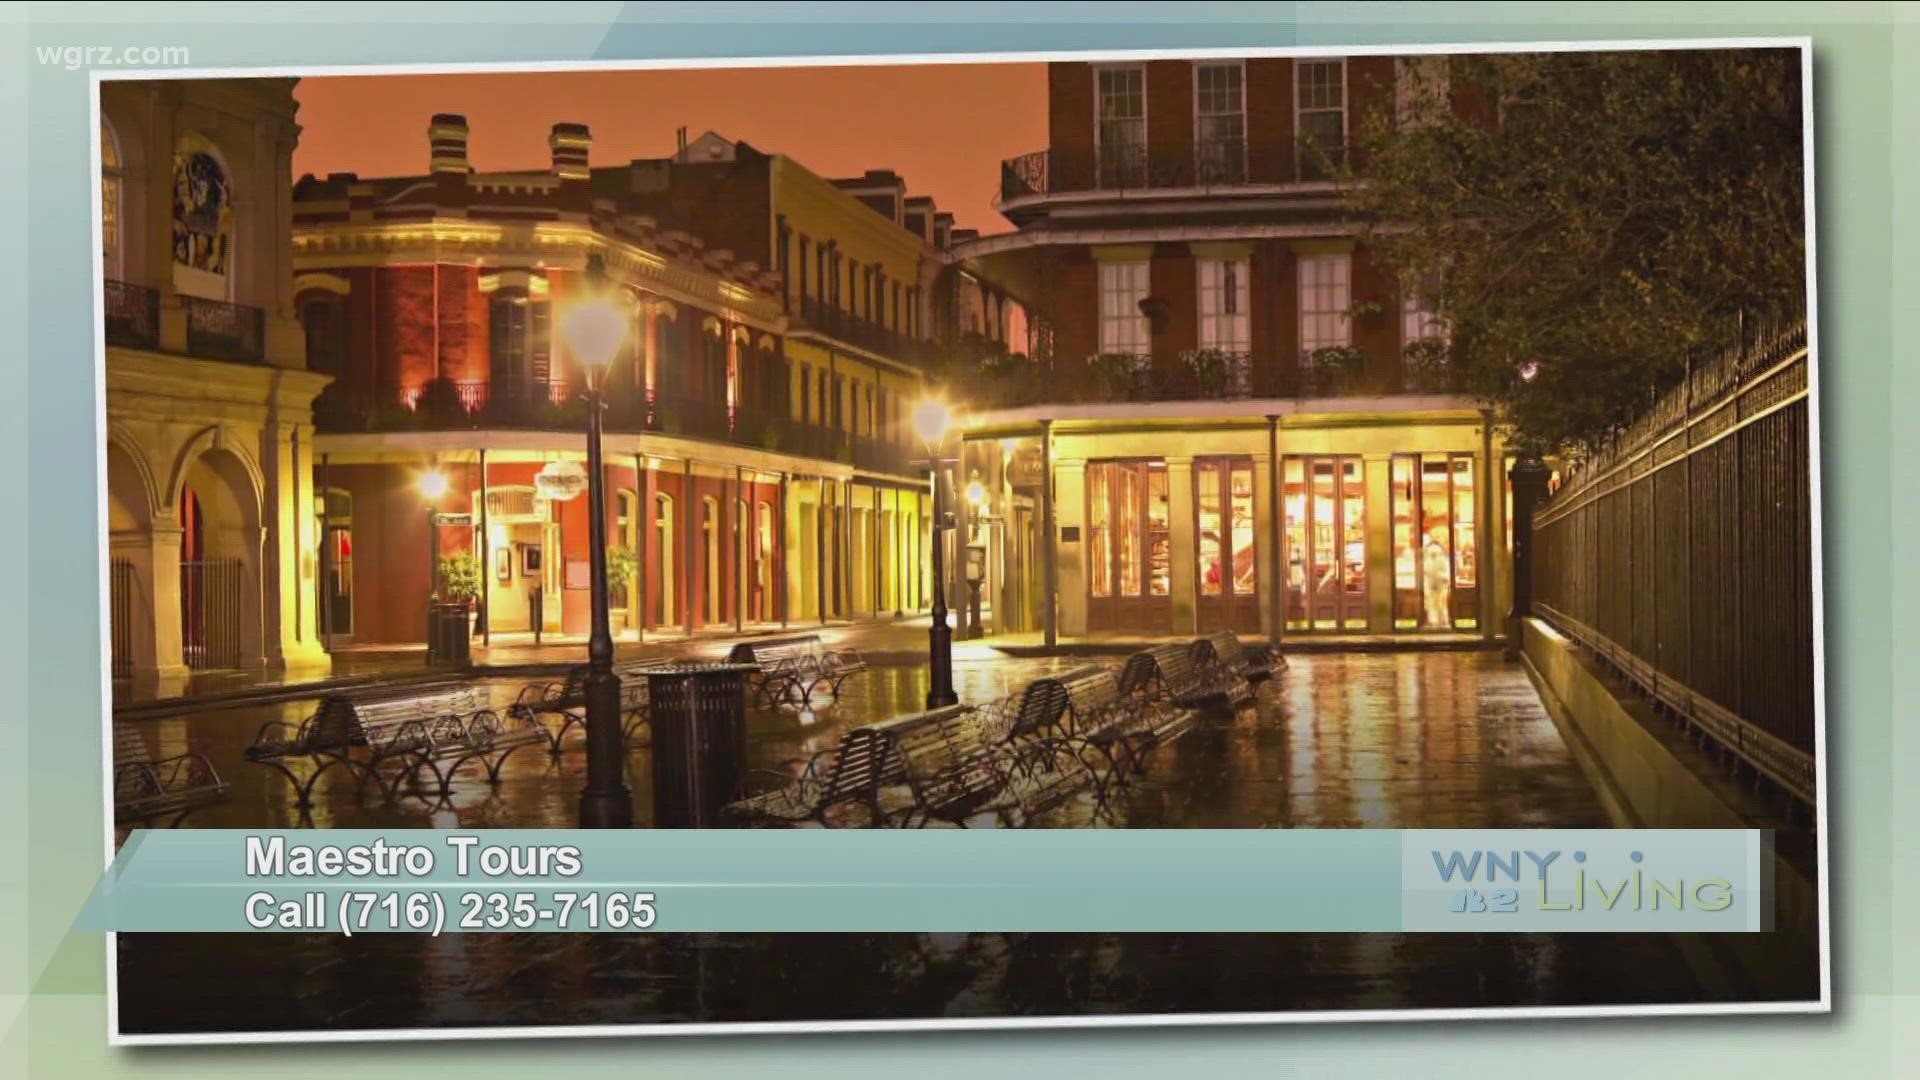 WNY Living - January 8 - Maestro Tours (THIS VIDEO IS SPONSORED BY MAESTRO TOURS)